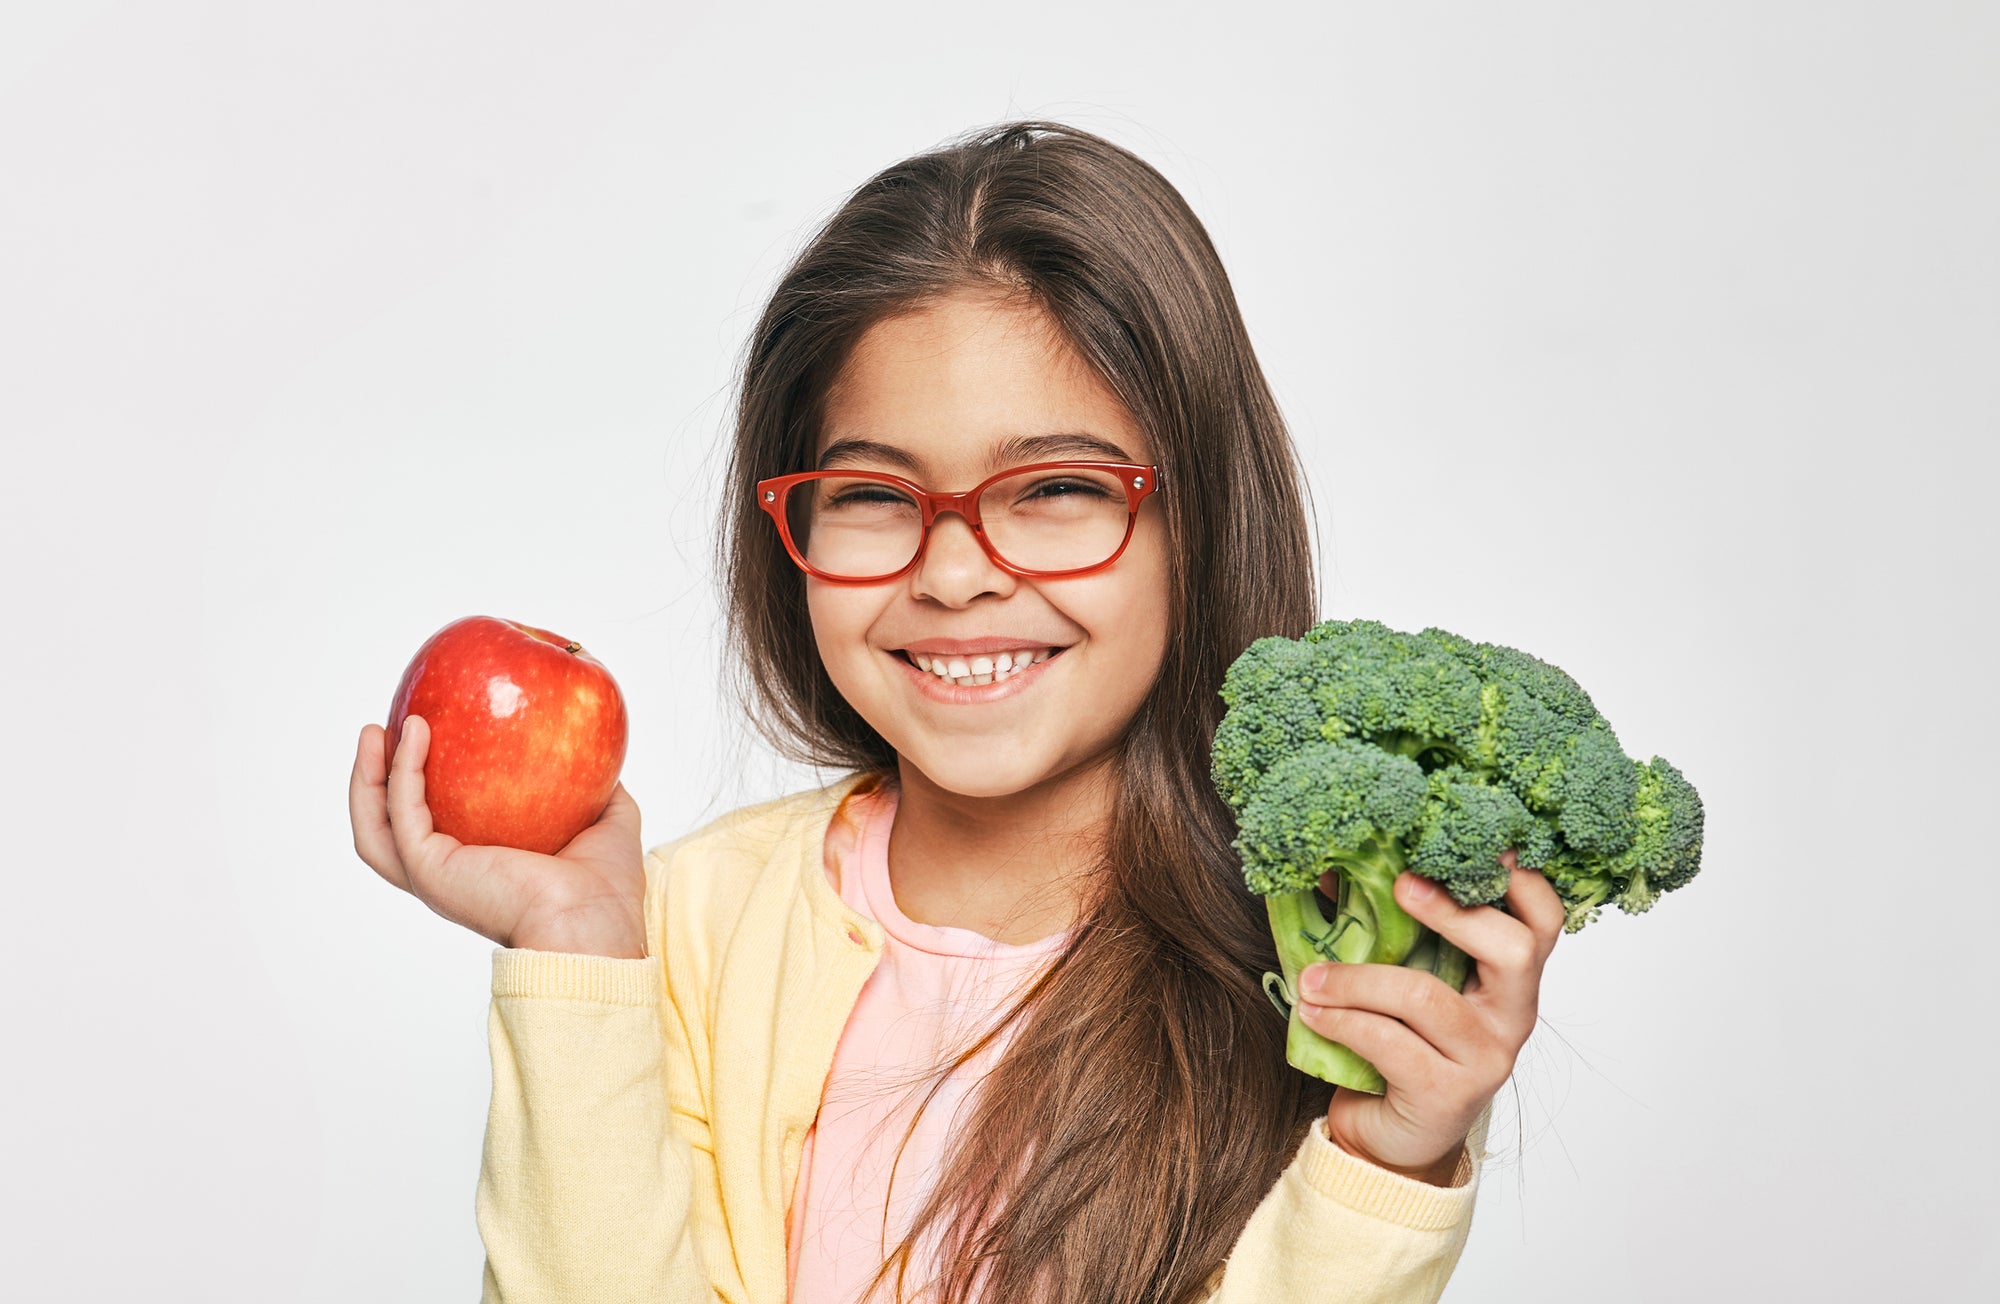 Girl holding fruits and veggies smiling